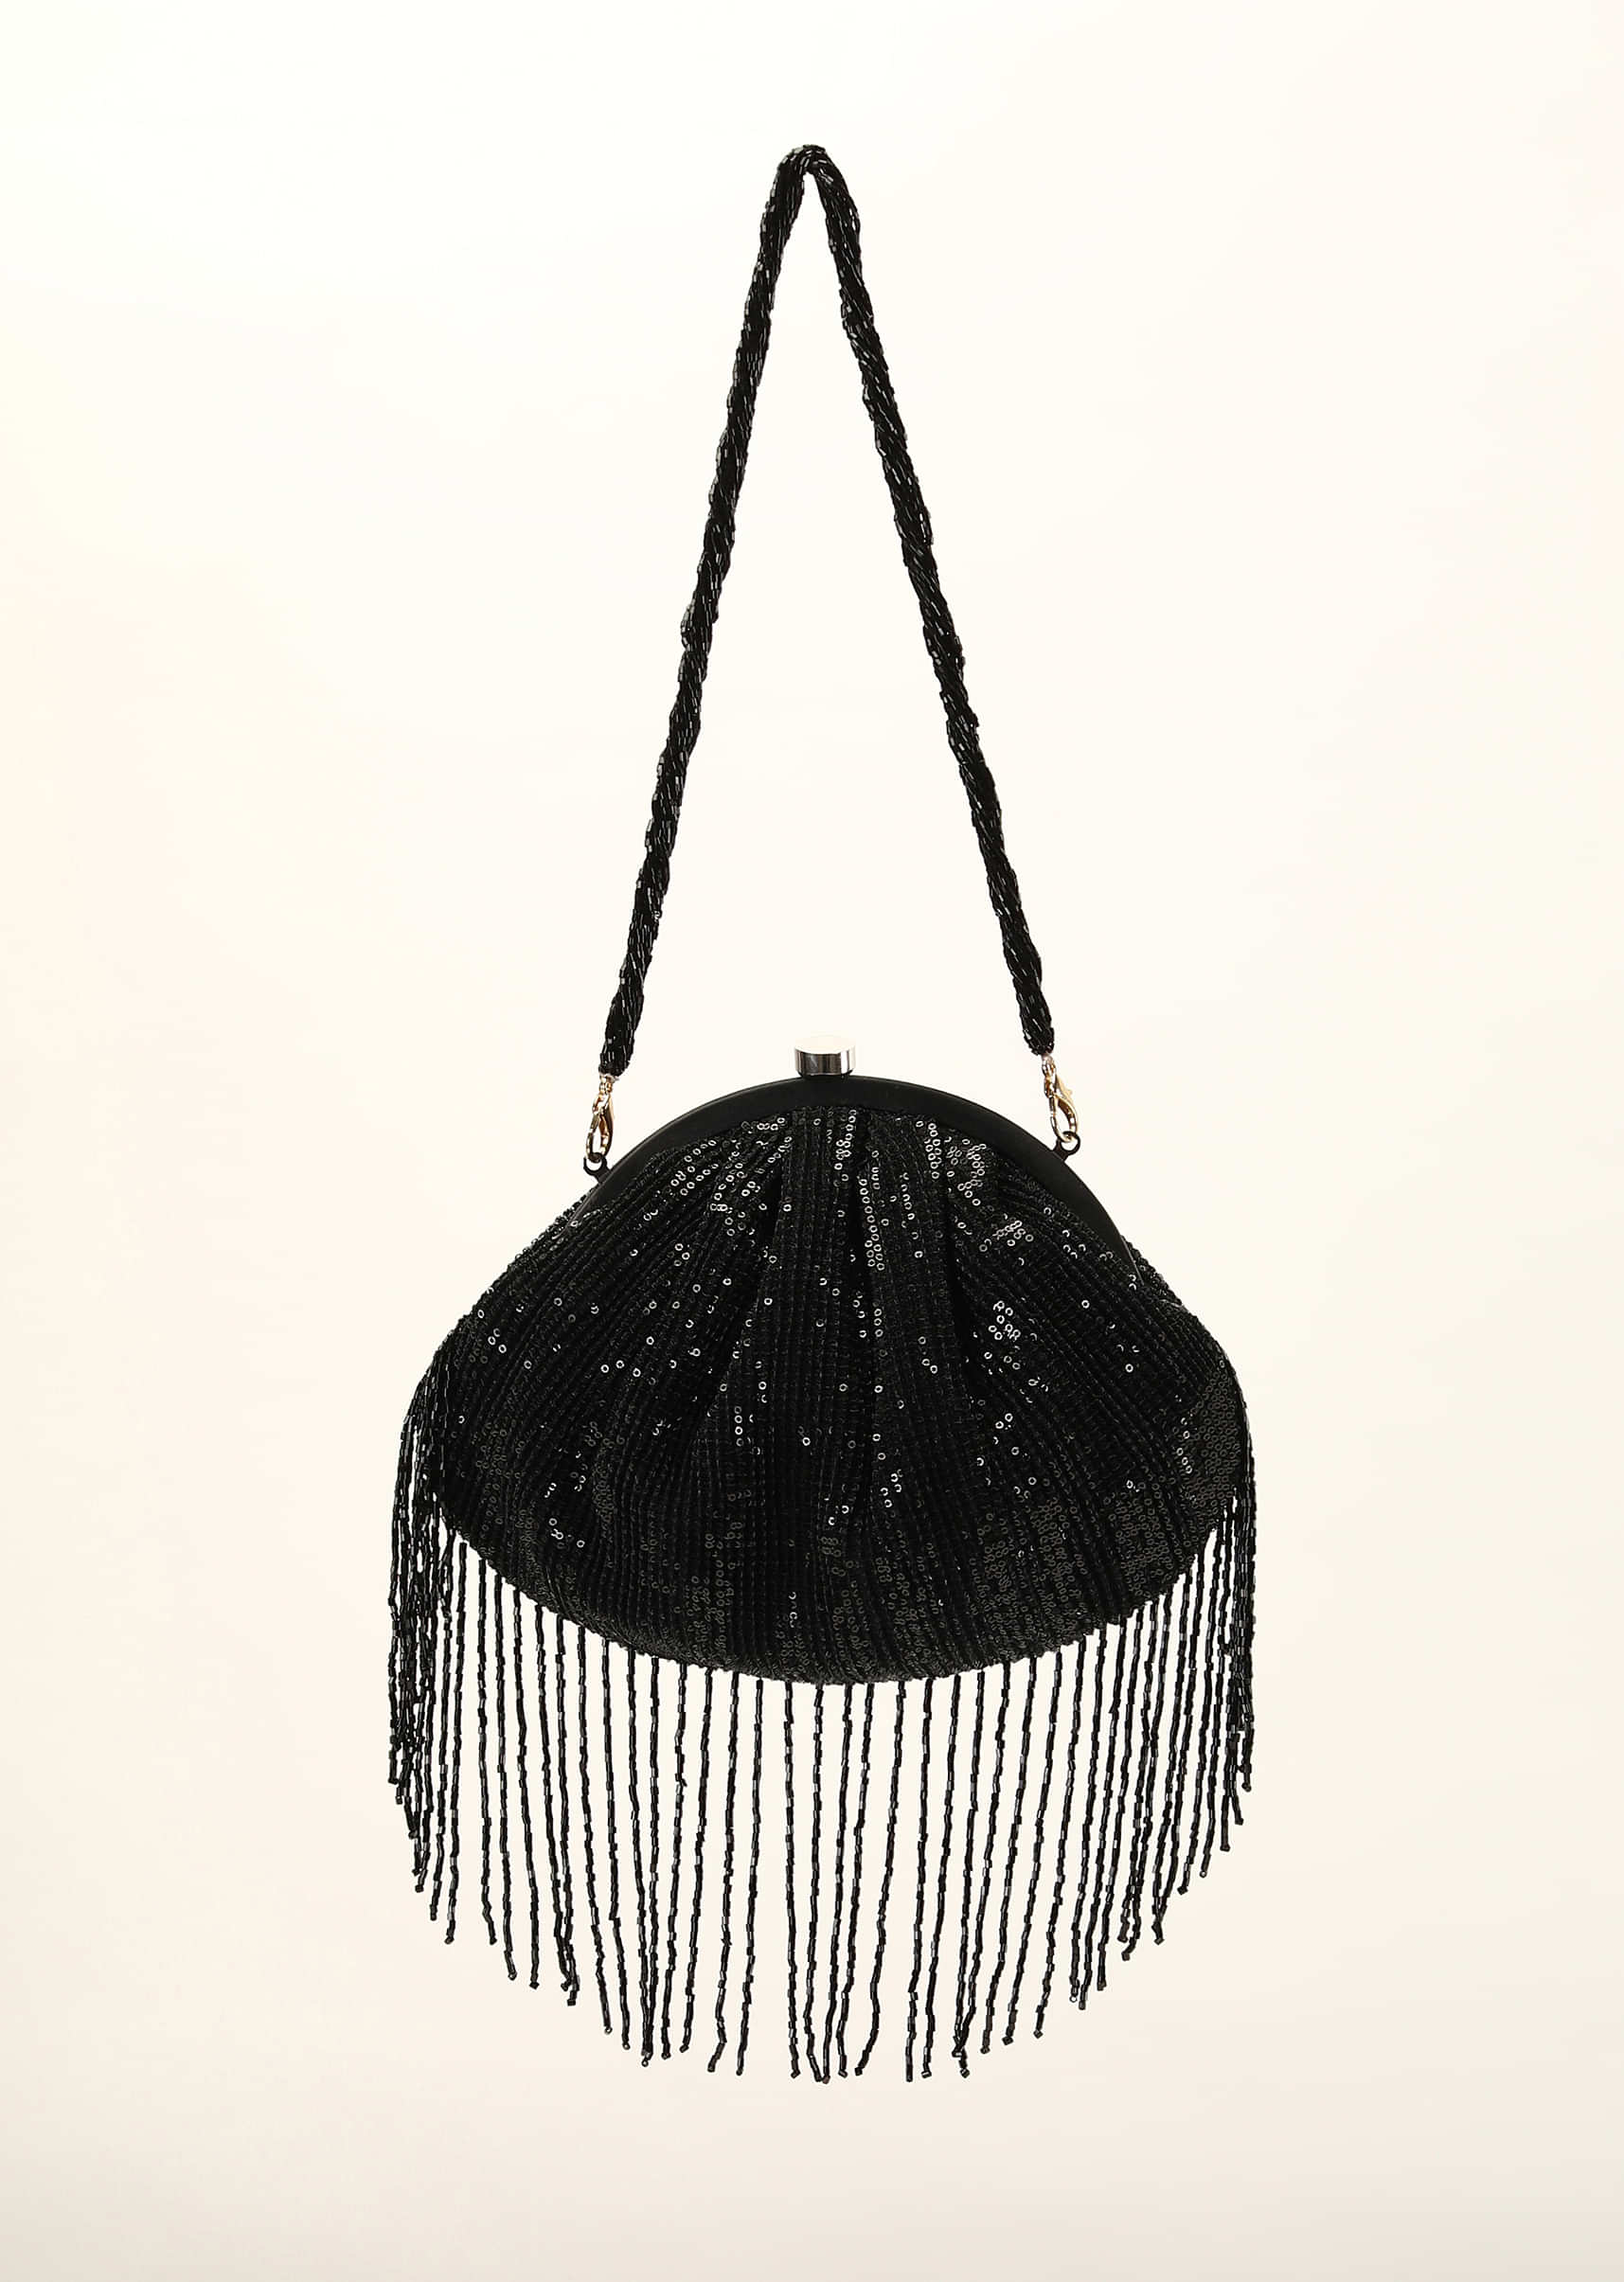 Black Clutch In Crushed Sequins Fabric With Cut Dana Fringes On The Edges